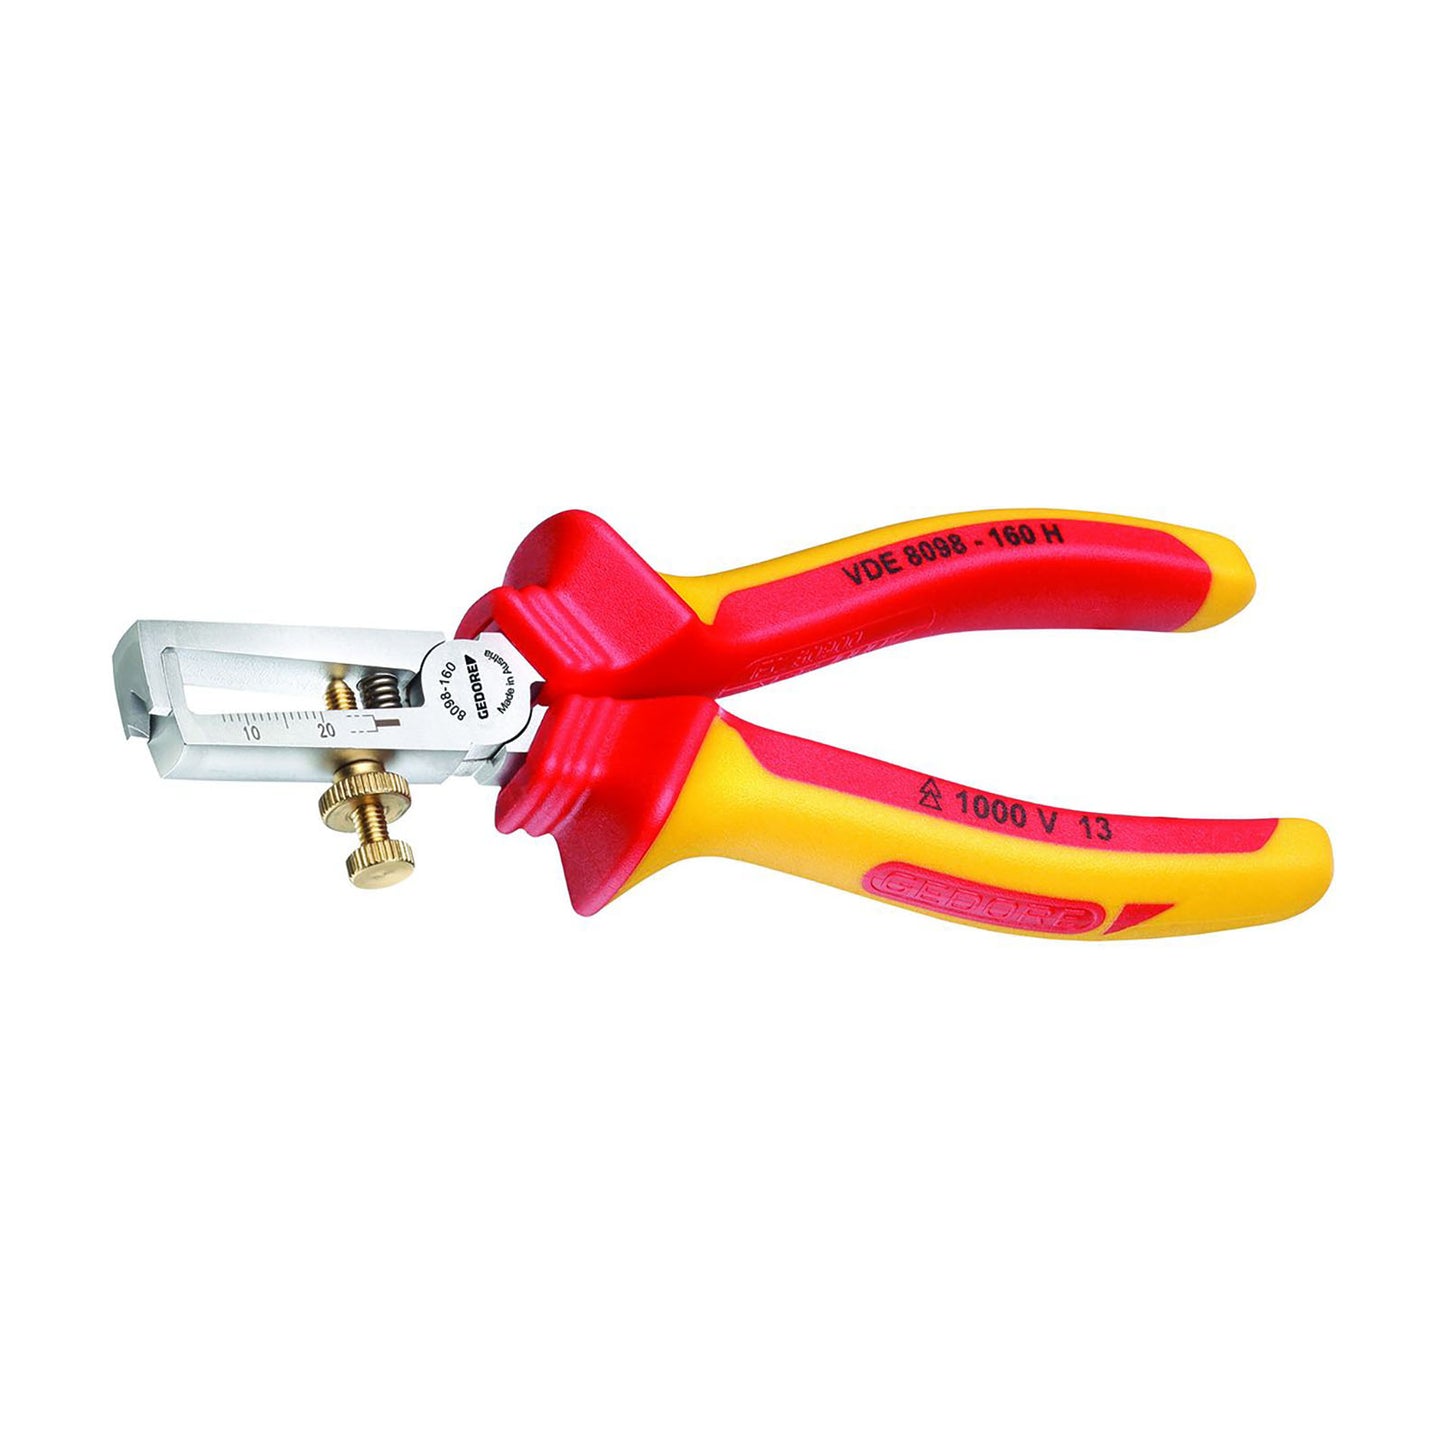 GEDORE SB VDE 8098-160 H - L*VDE Wire Stripping Pliers (1699997)